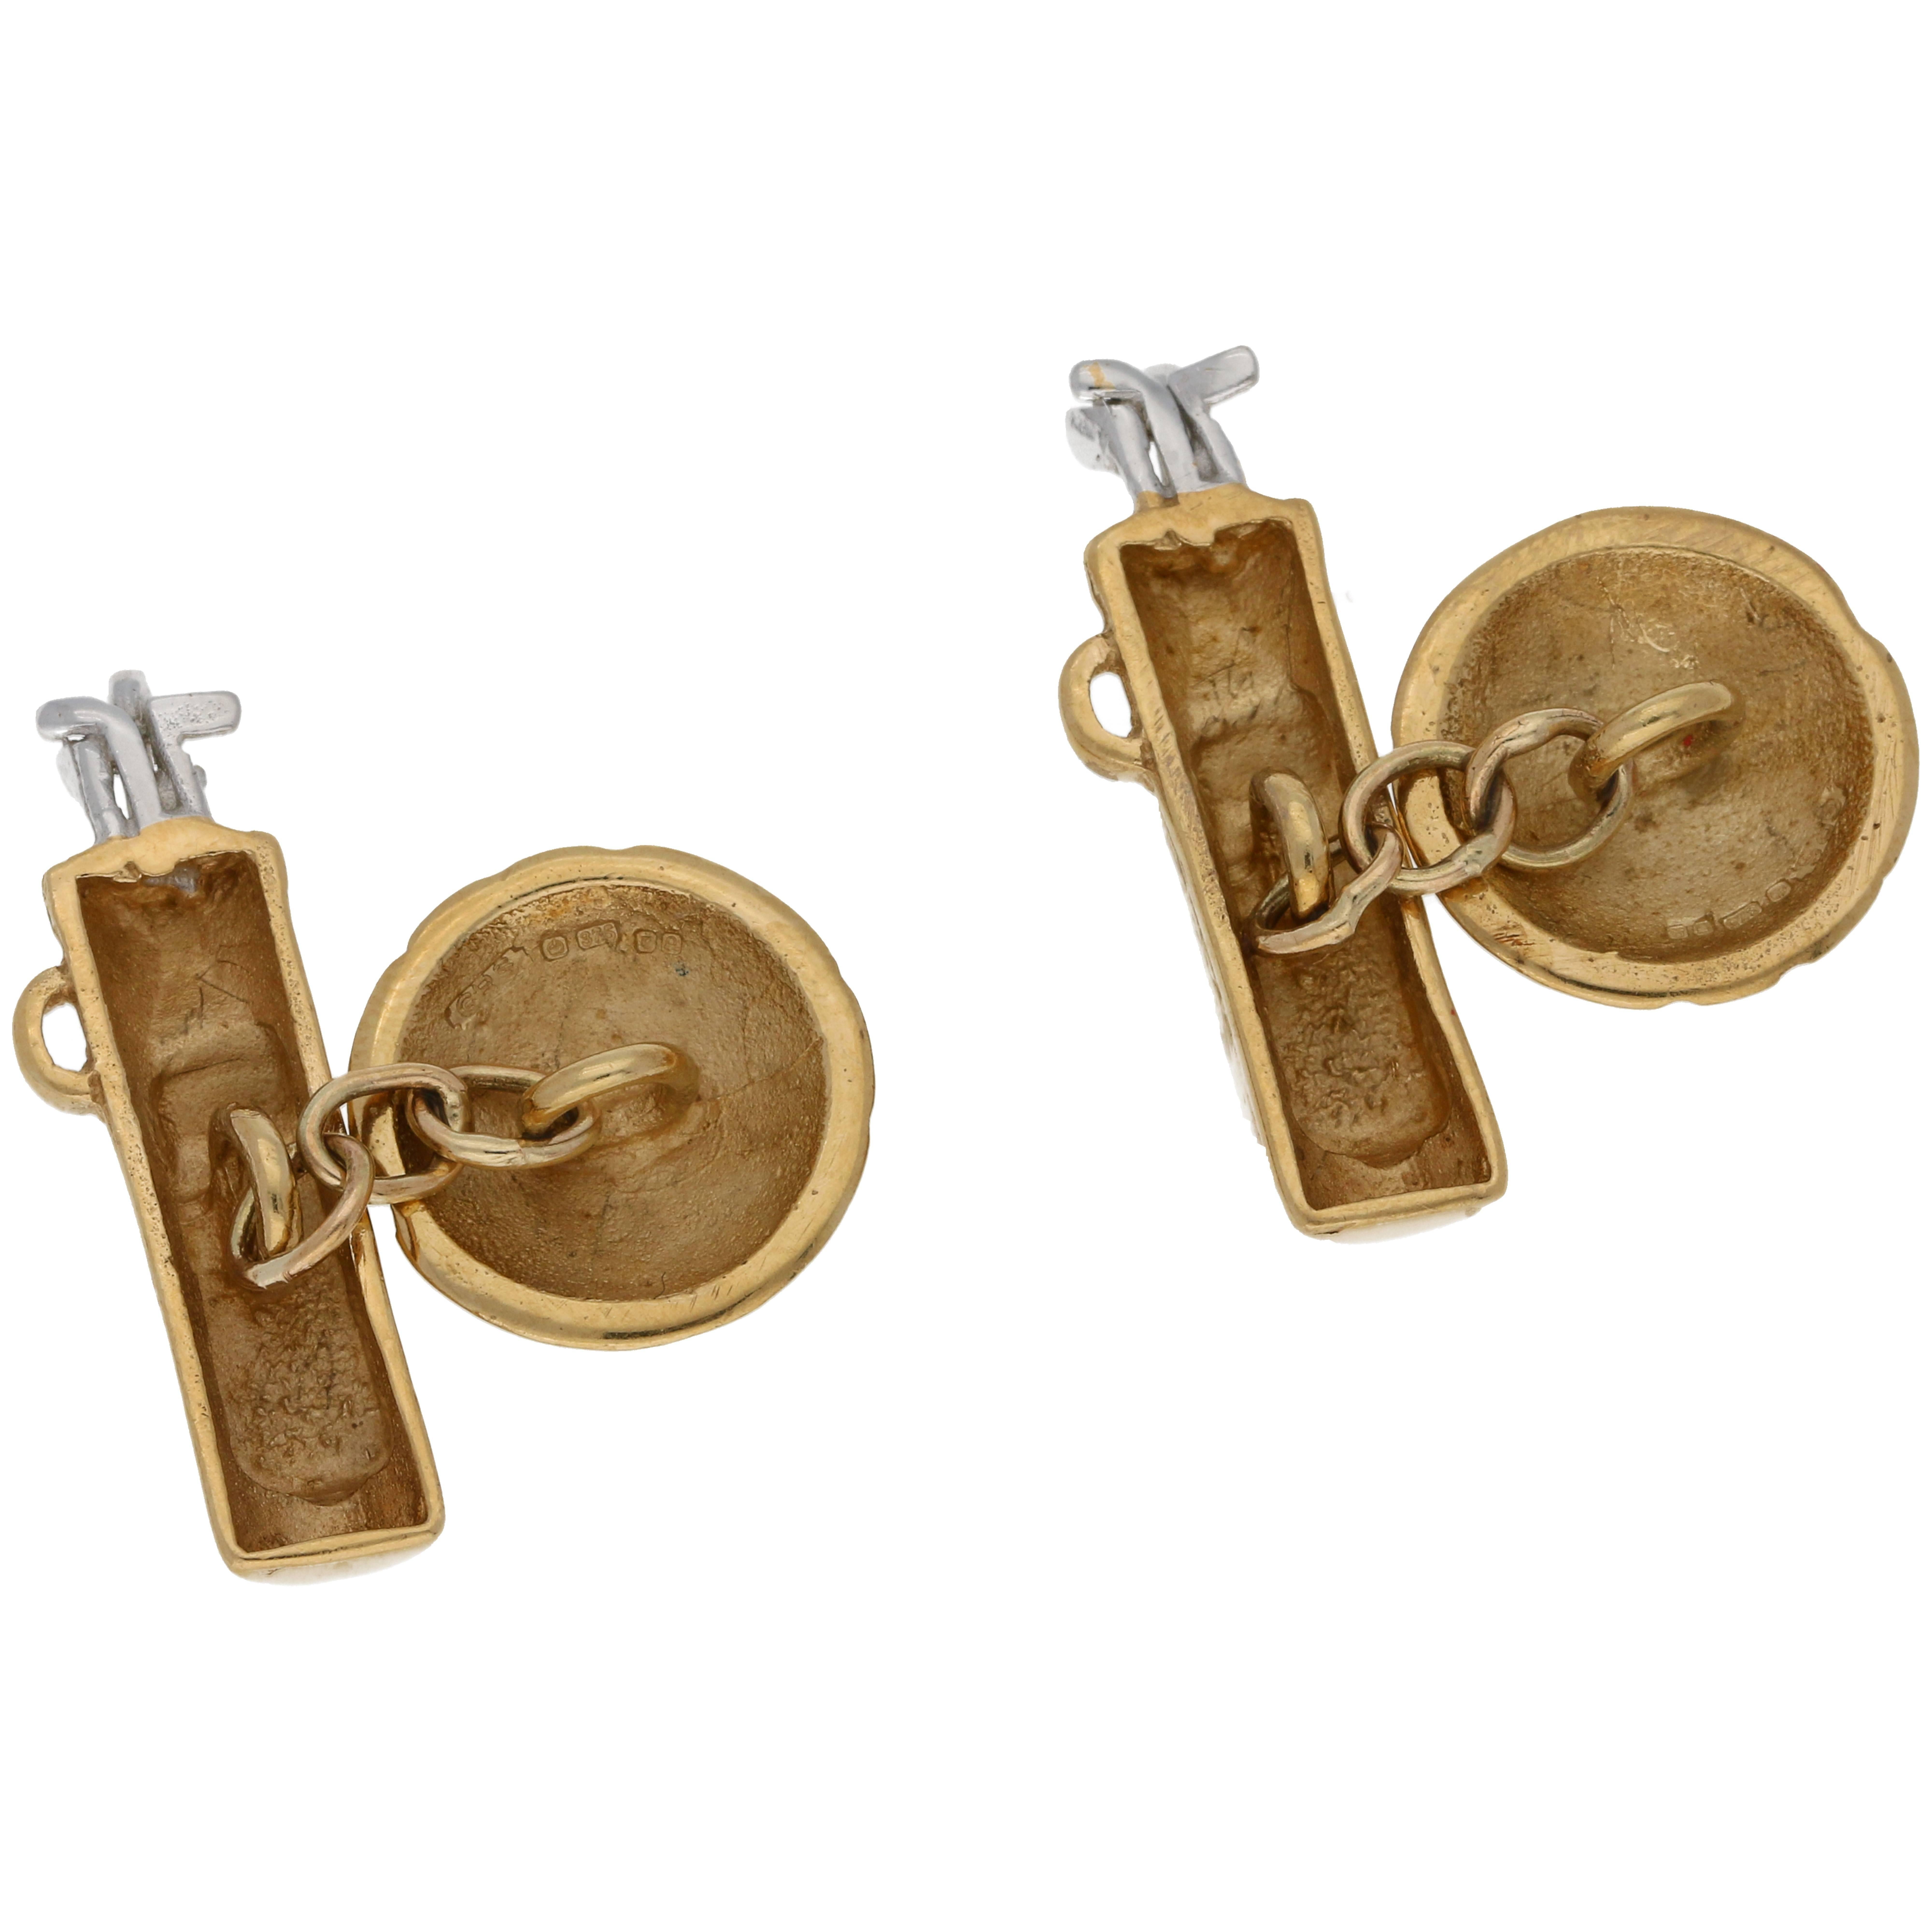 A delightful pair of 9ct yellow and white gold golf bag and ball cufflinks. With one side depicting a golden golf bag with white gold clubs, and the other a domed and dimpled golf ball. On a three chain link fitting.